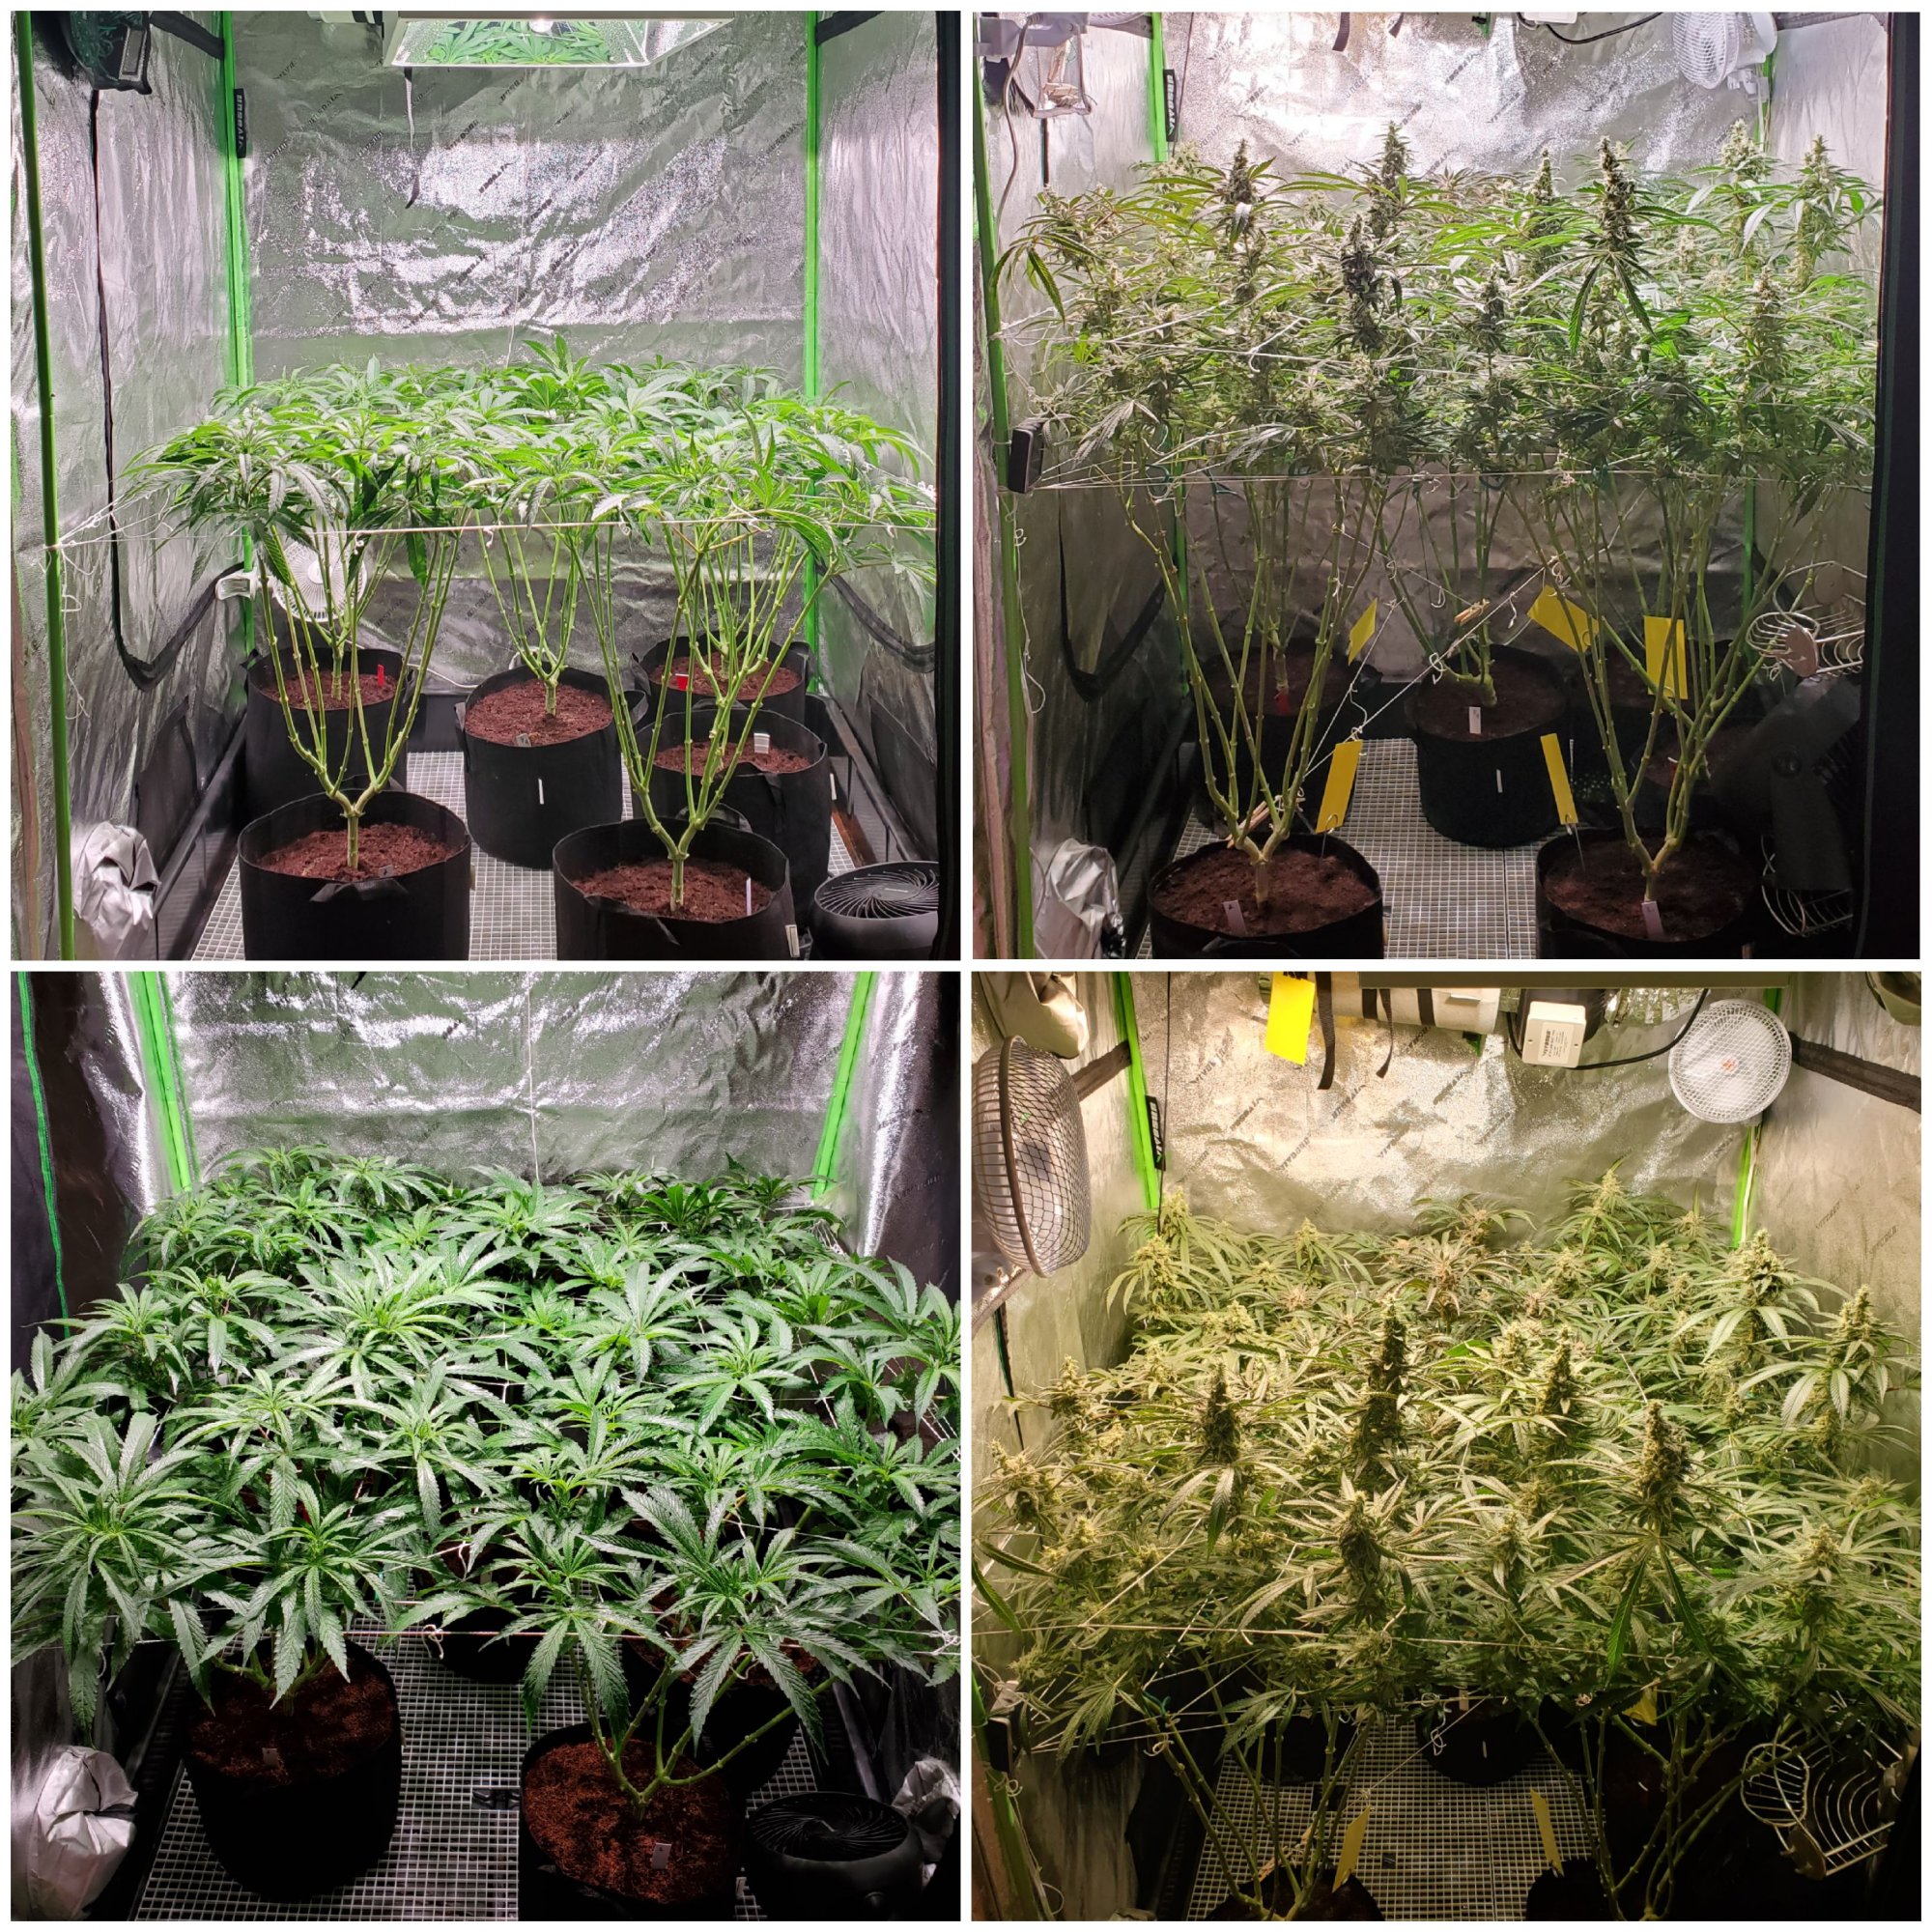 Scrog vs trellis whats the difference